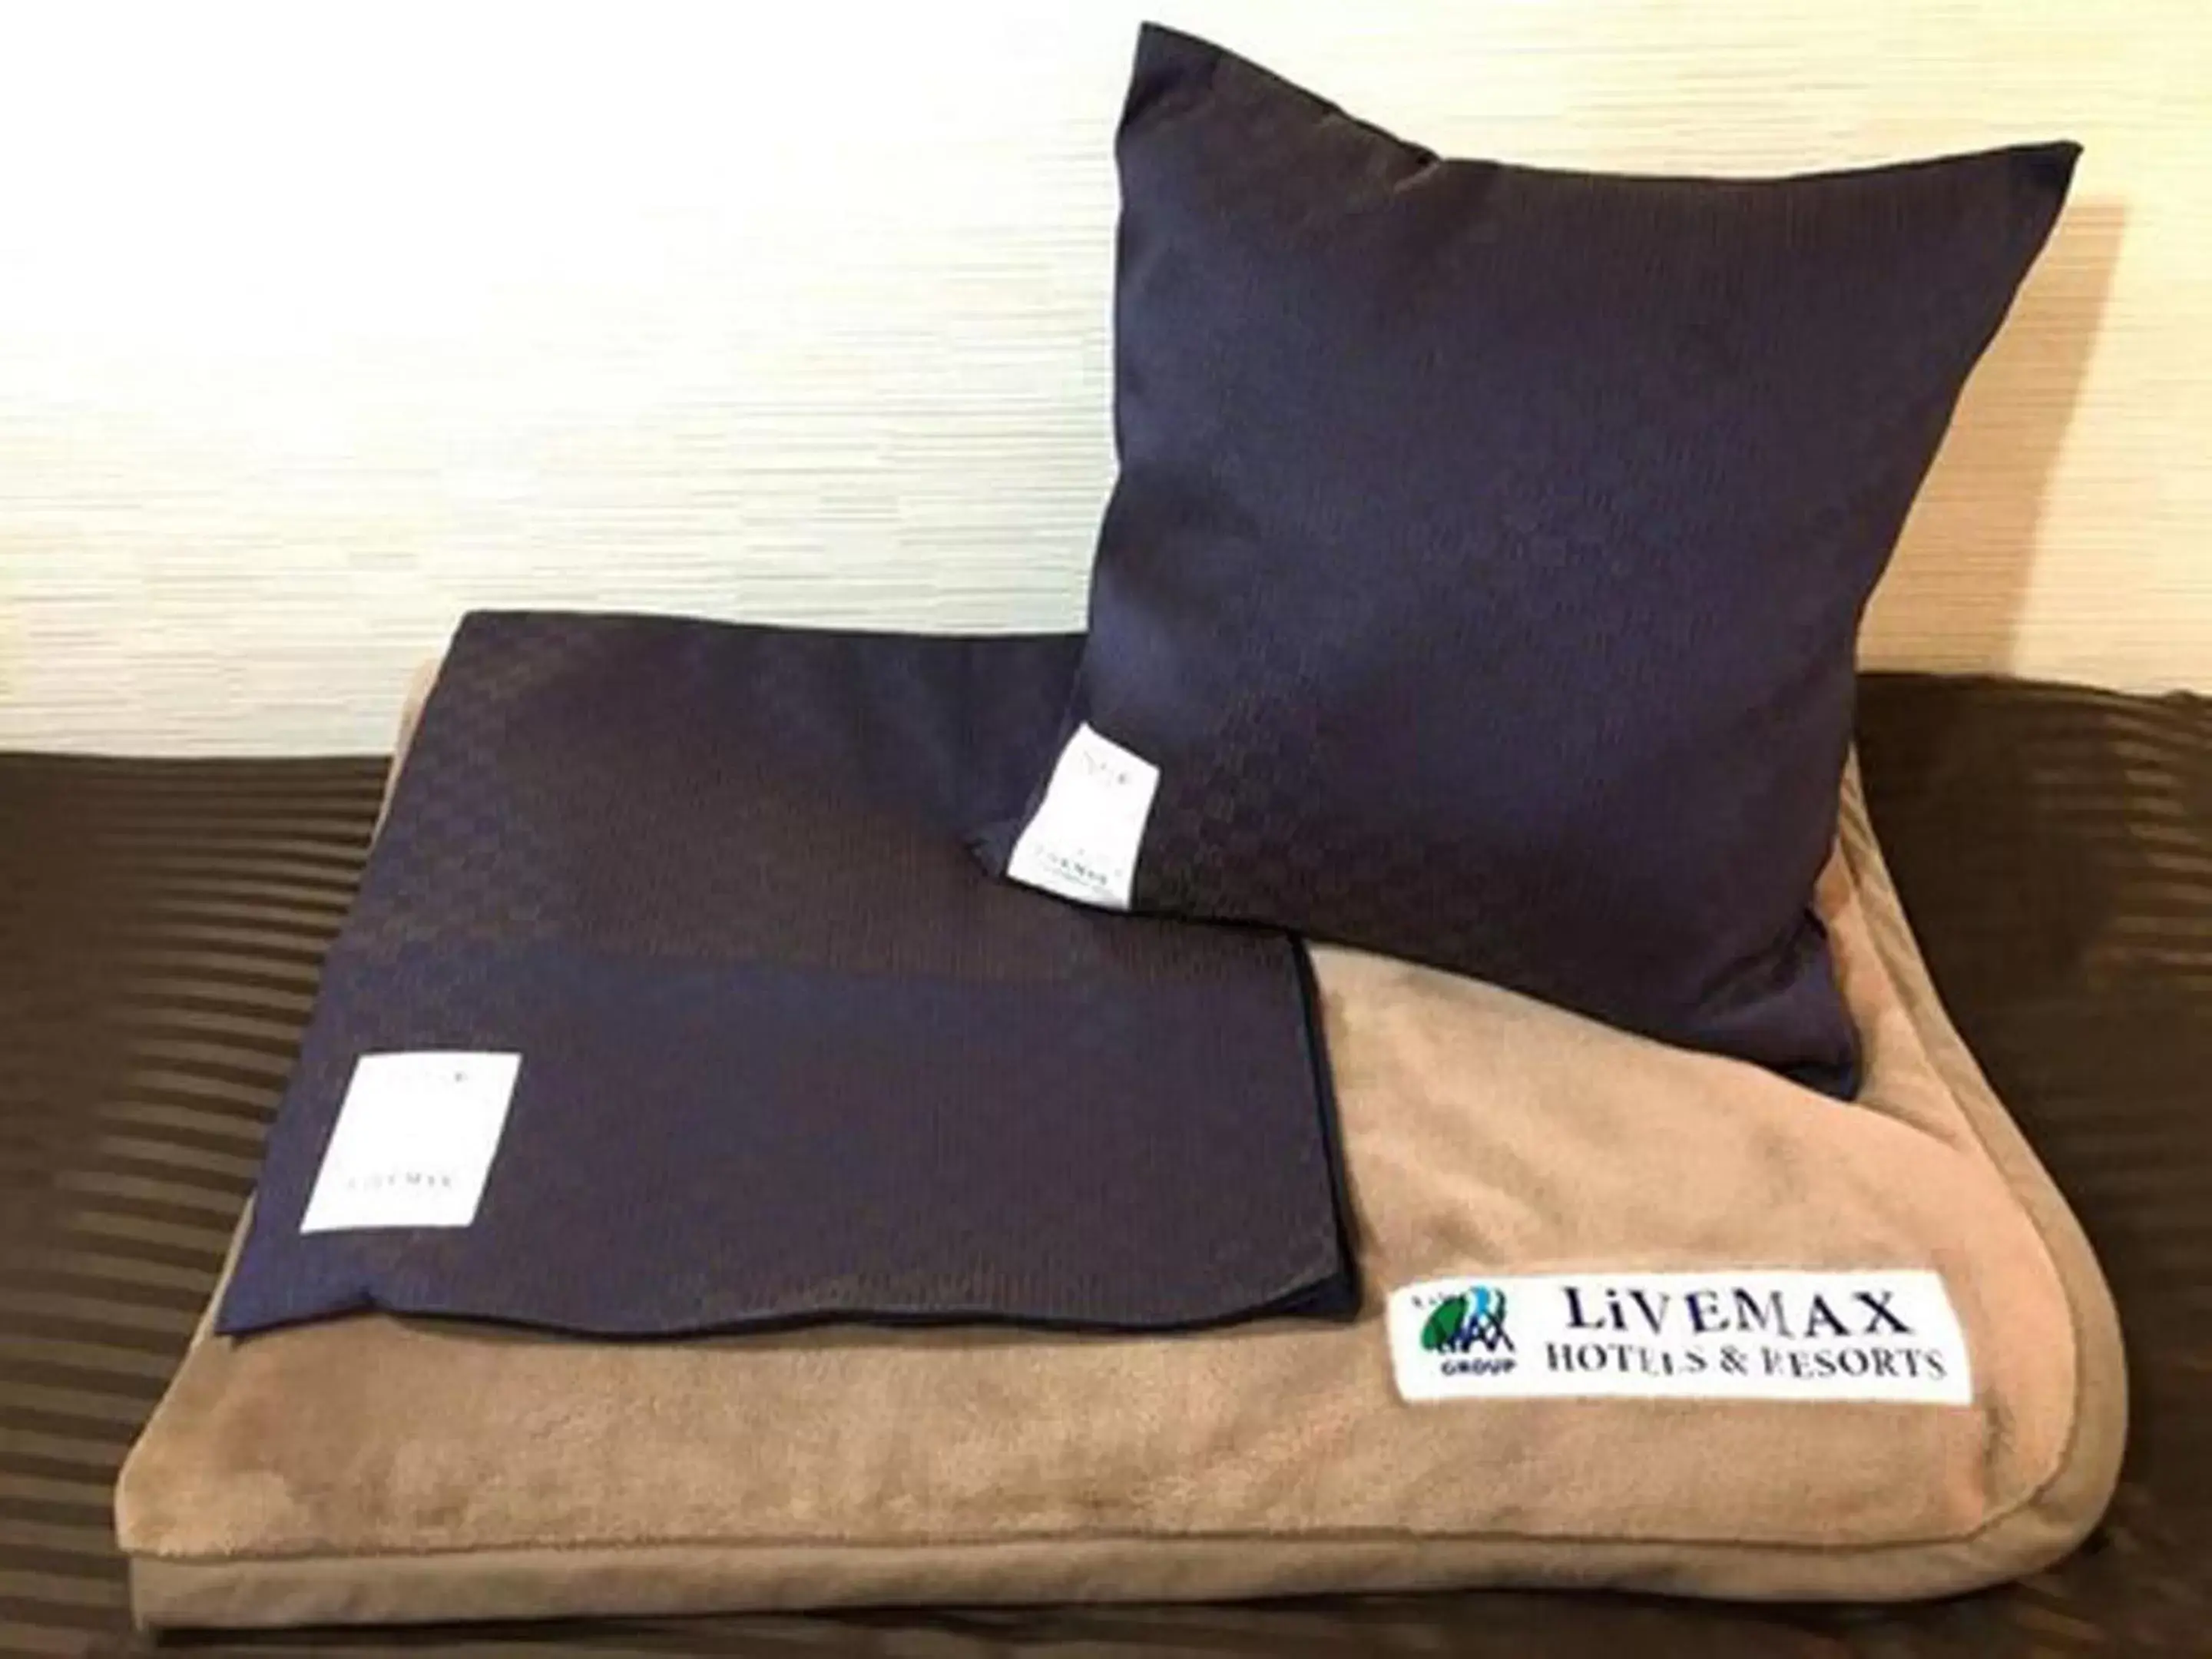 Area and facilities, Bed in HOTEL LiVEMAX Okayama West